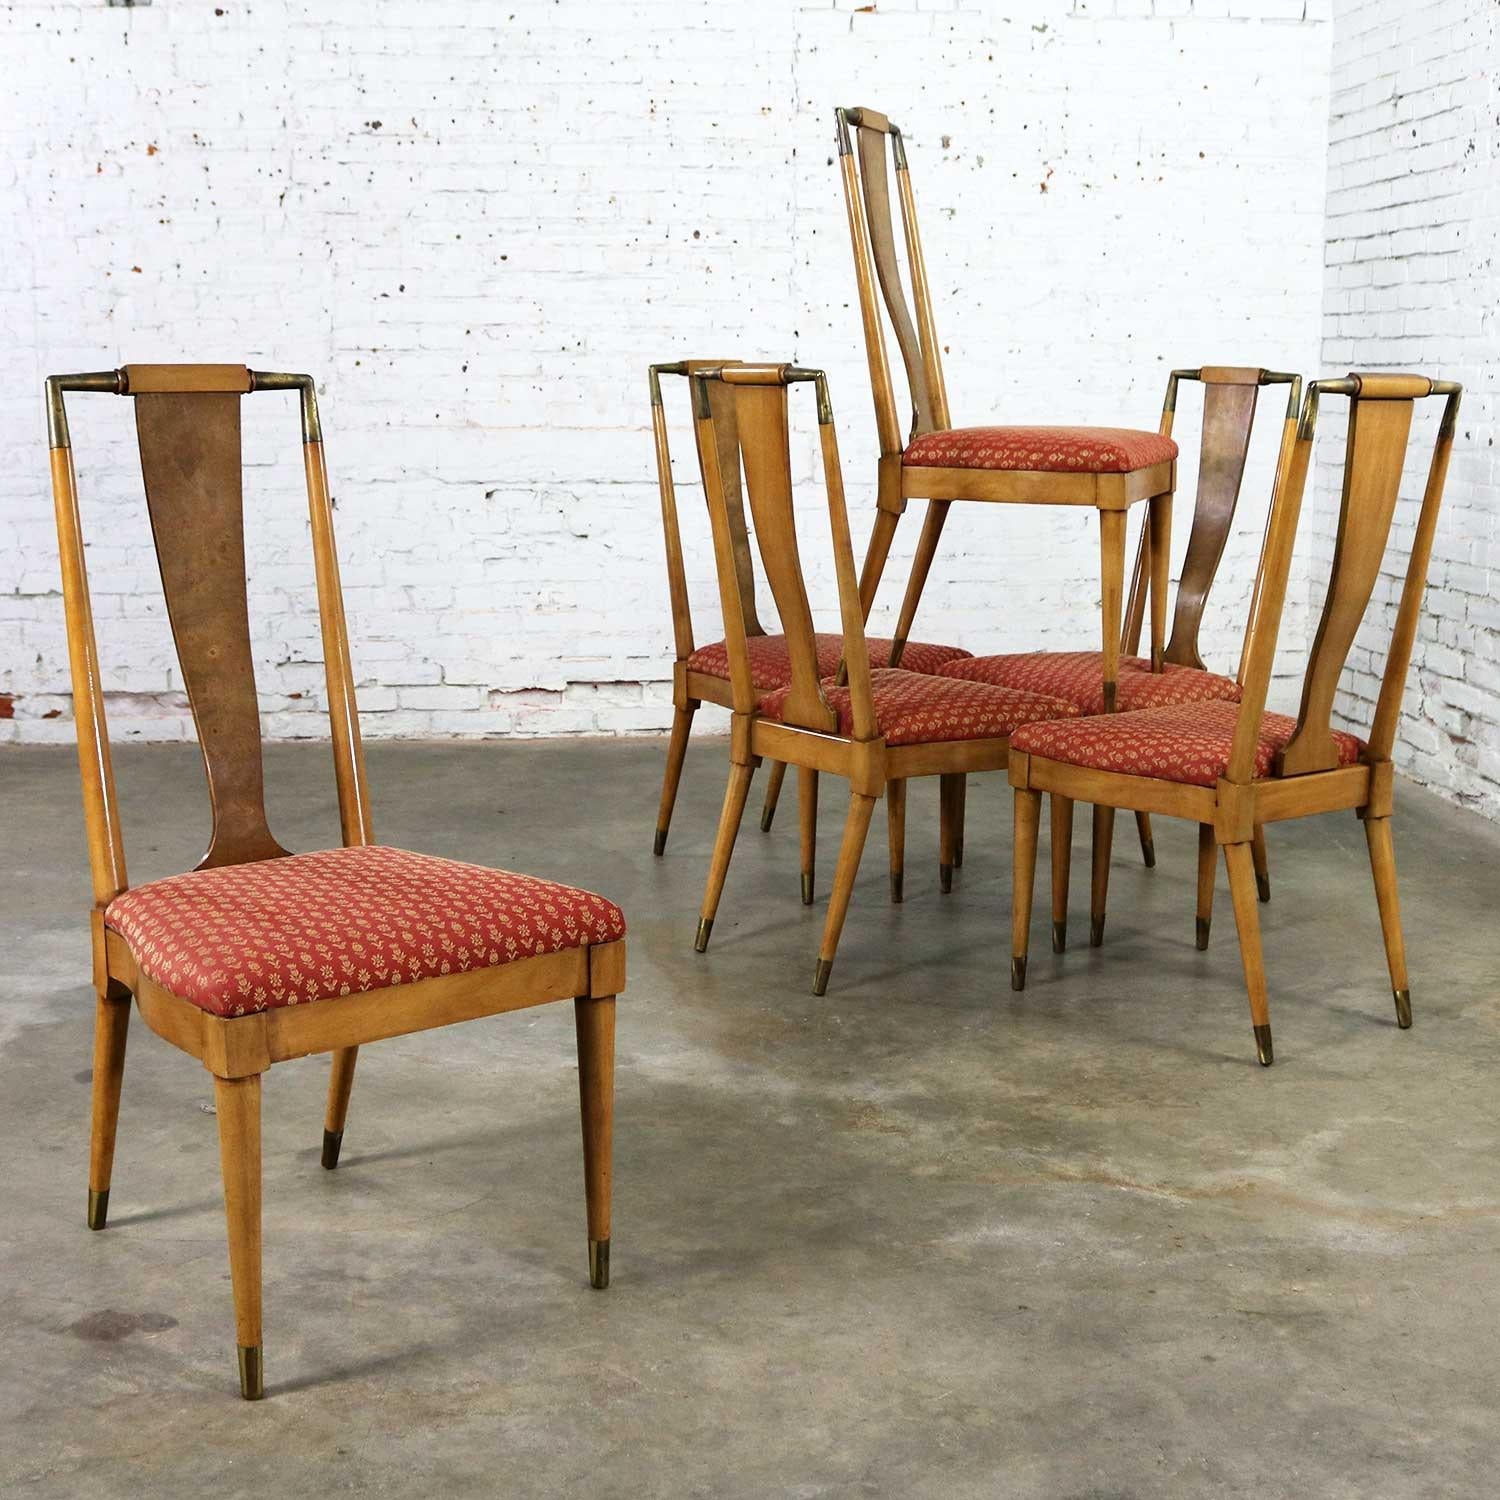 Brass Midcentury Contempora Dining Chairs by William Clingman for J. L. Metz Set of 6 For Sale